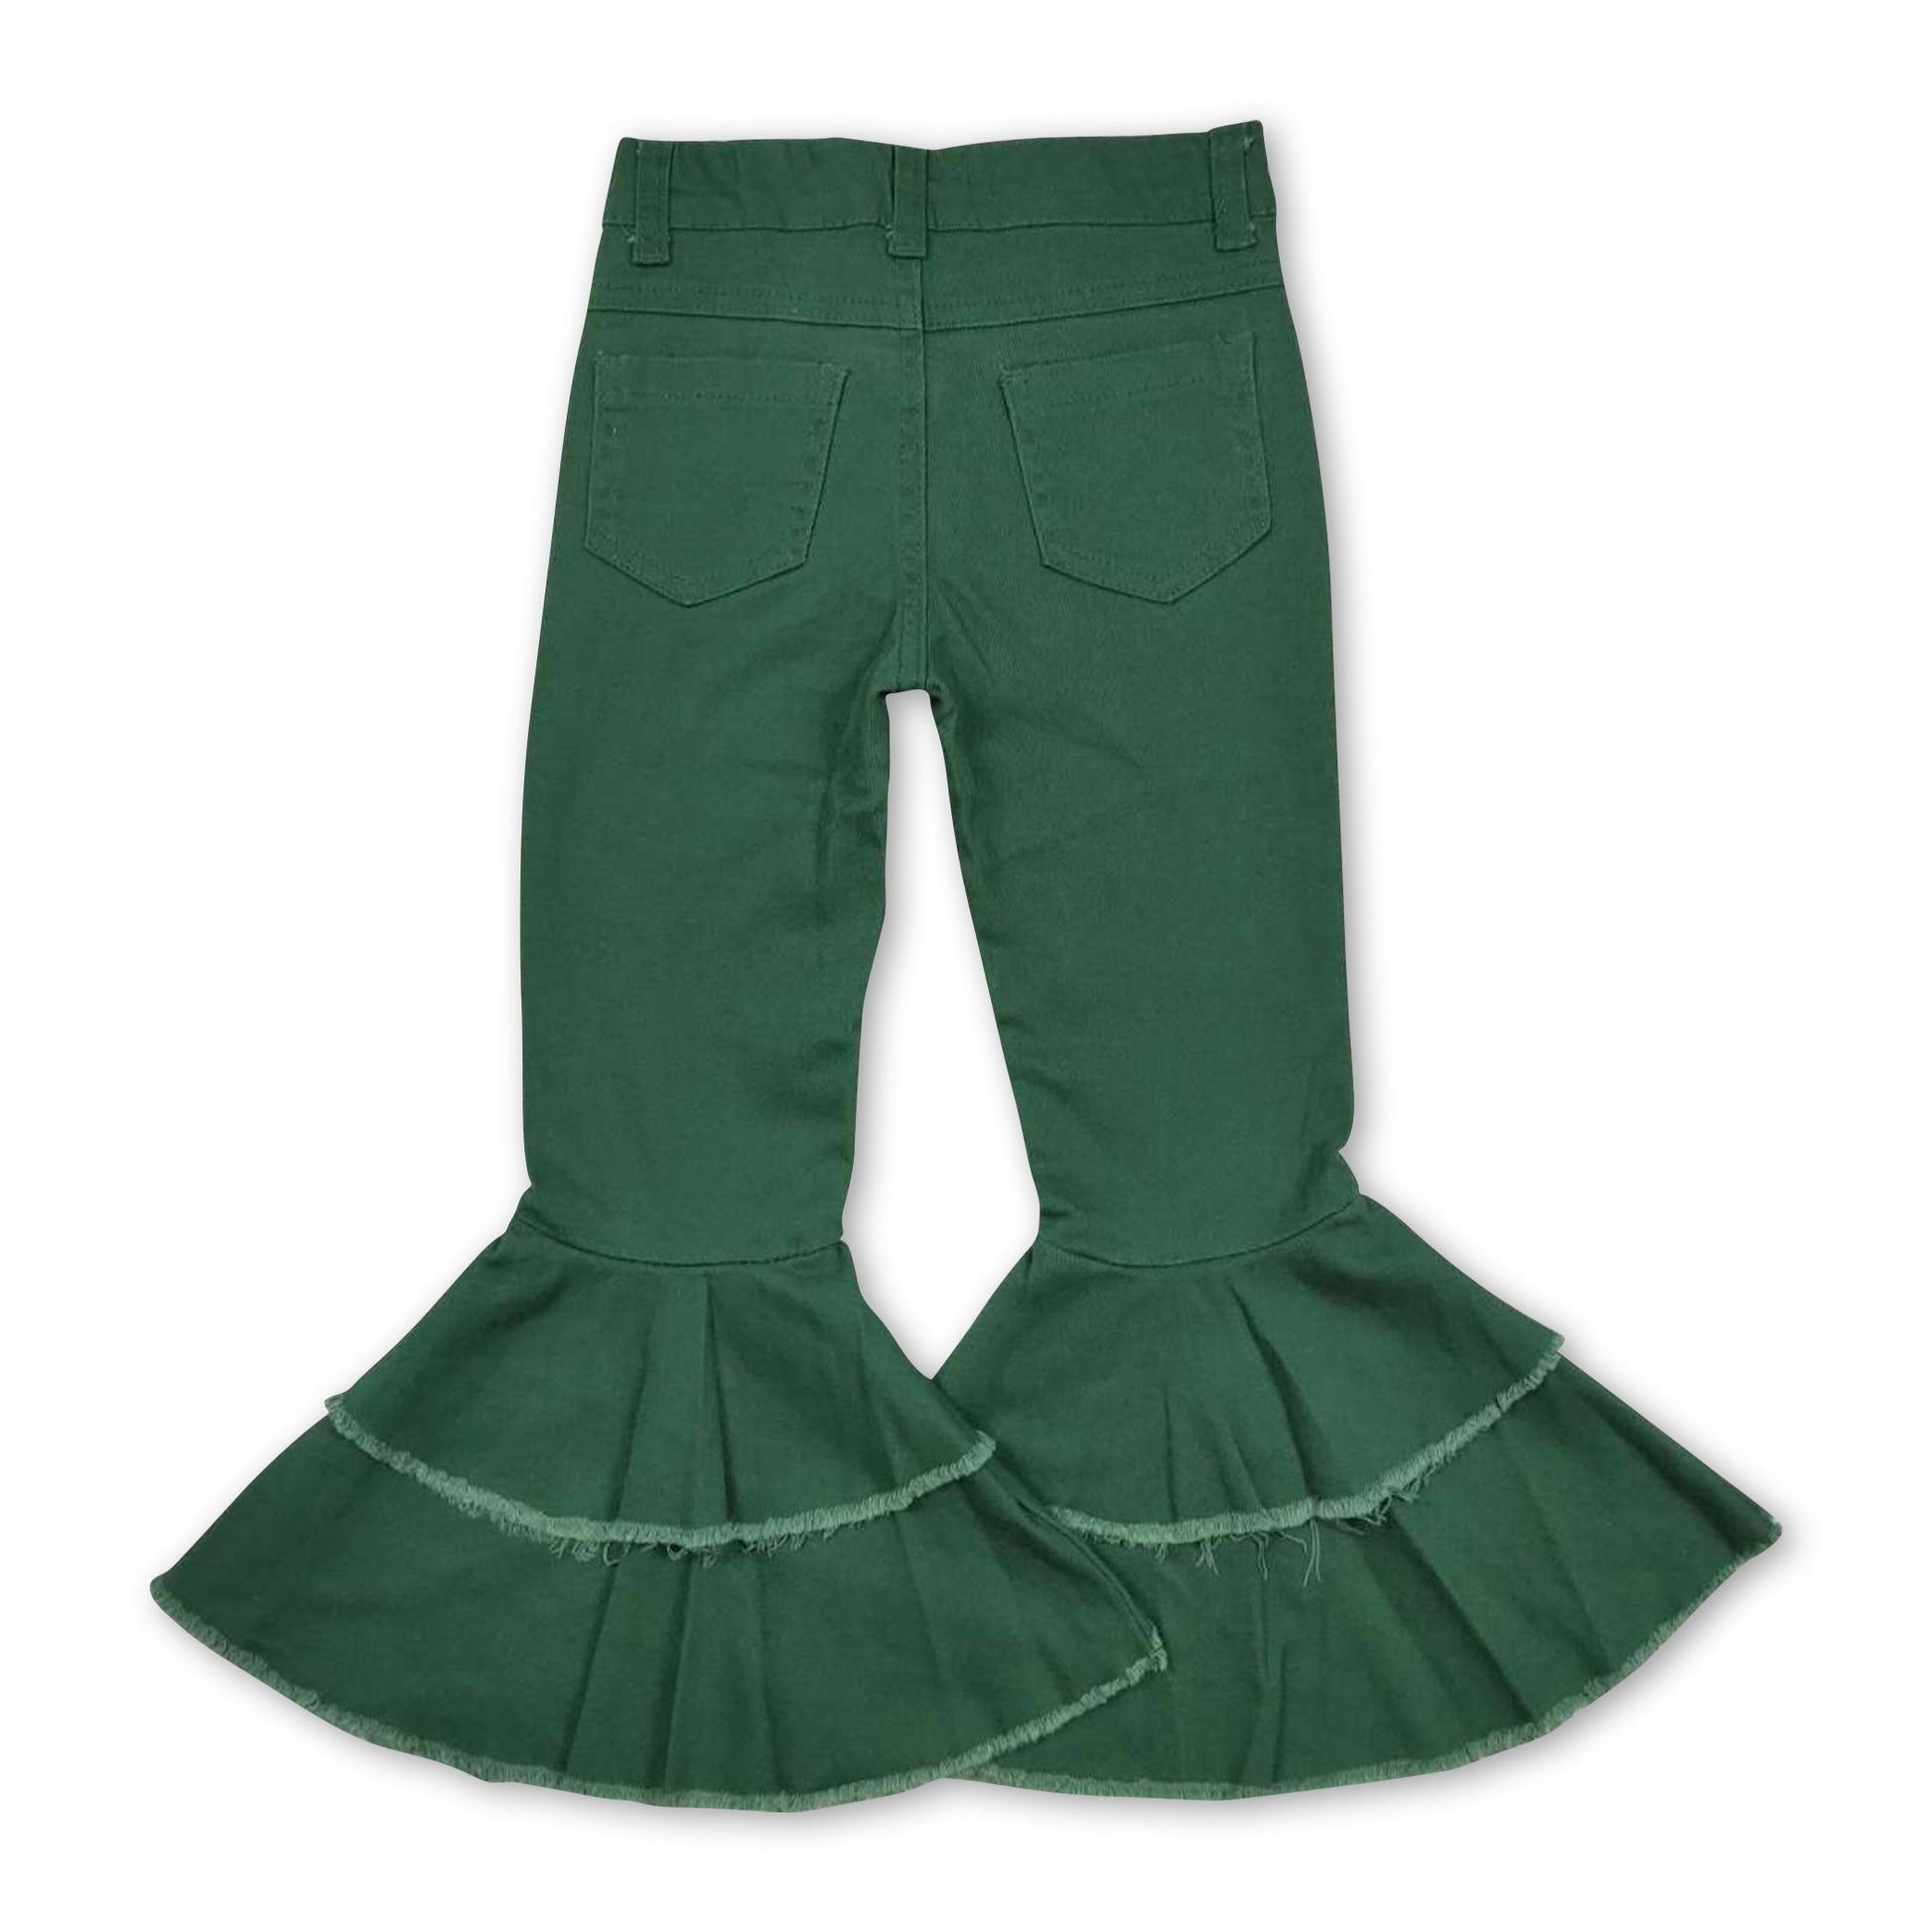 Green ruffle bell bottom pants baby girls jeans – Western kids clothes